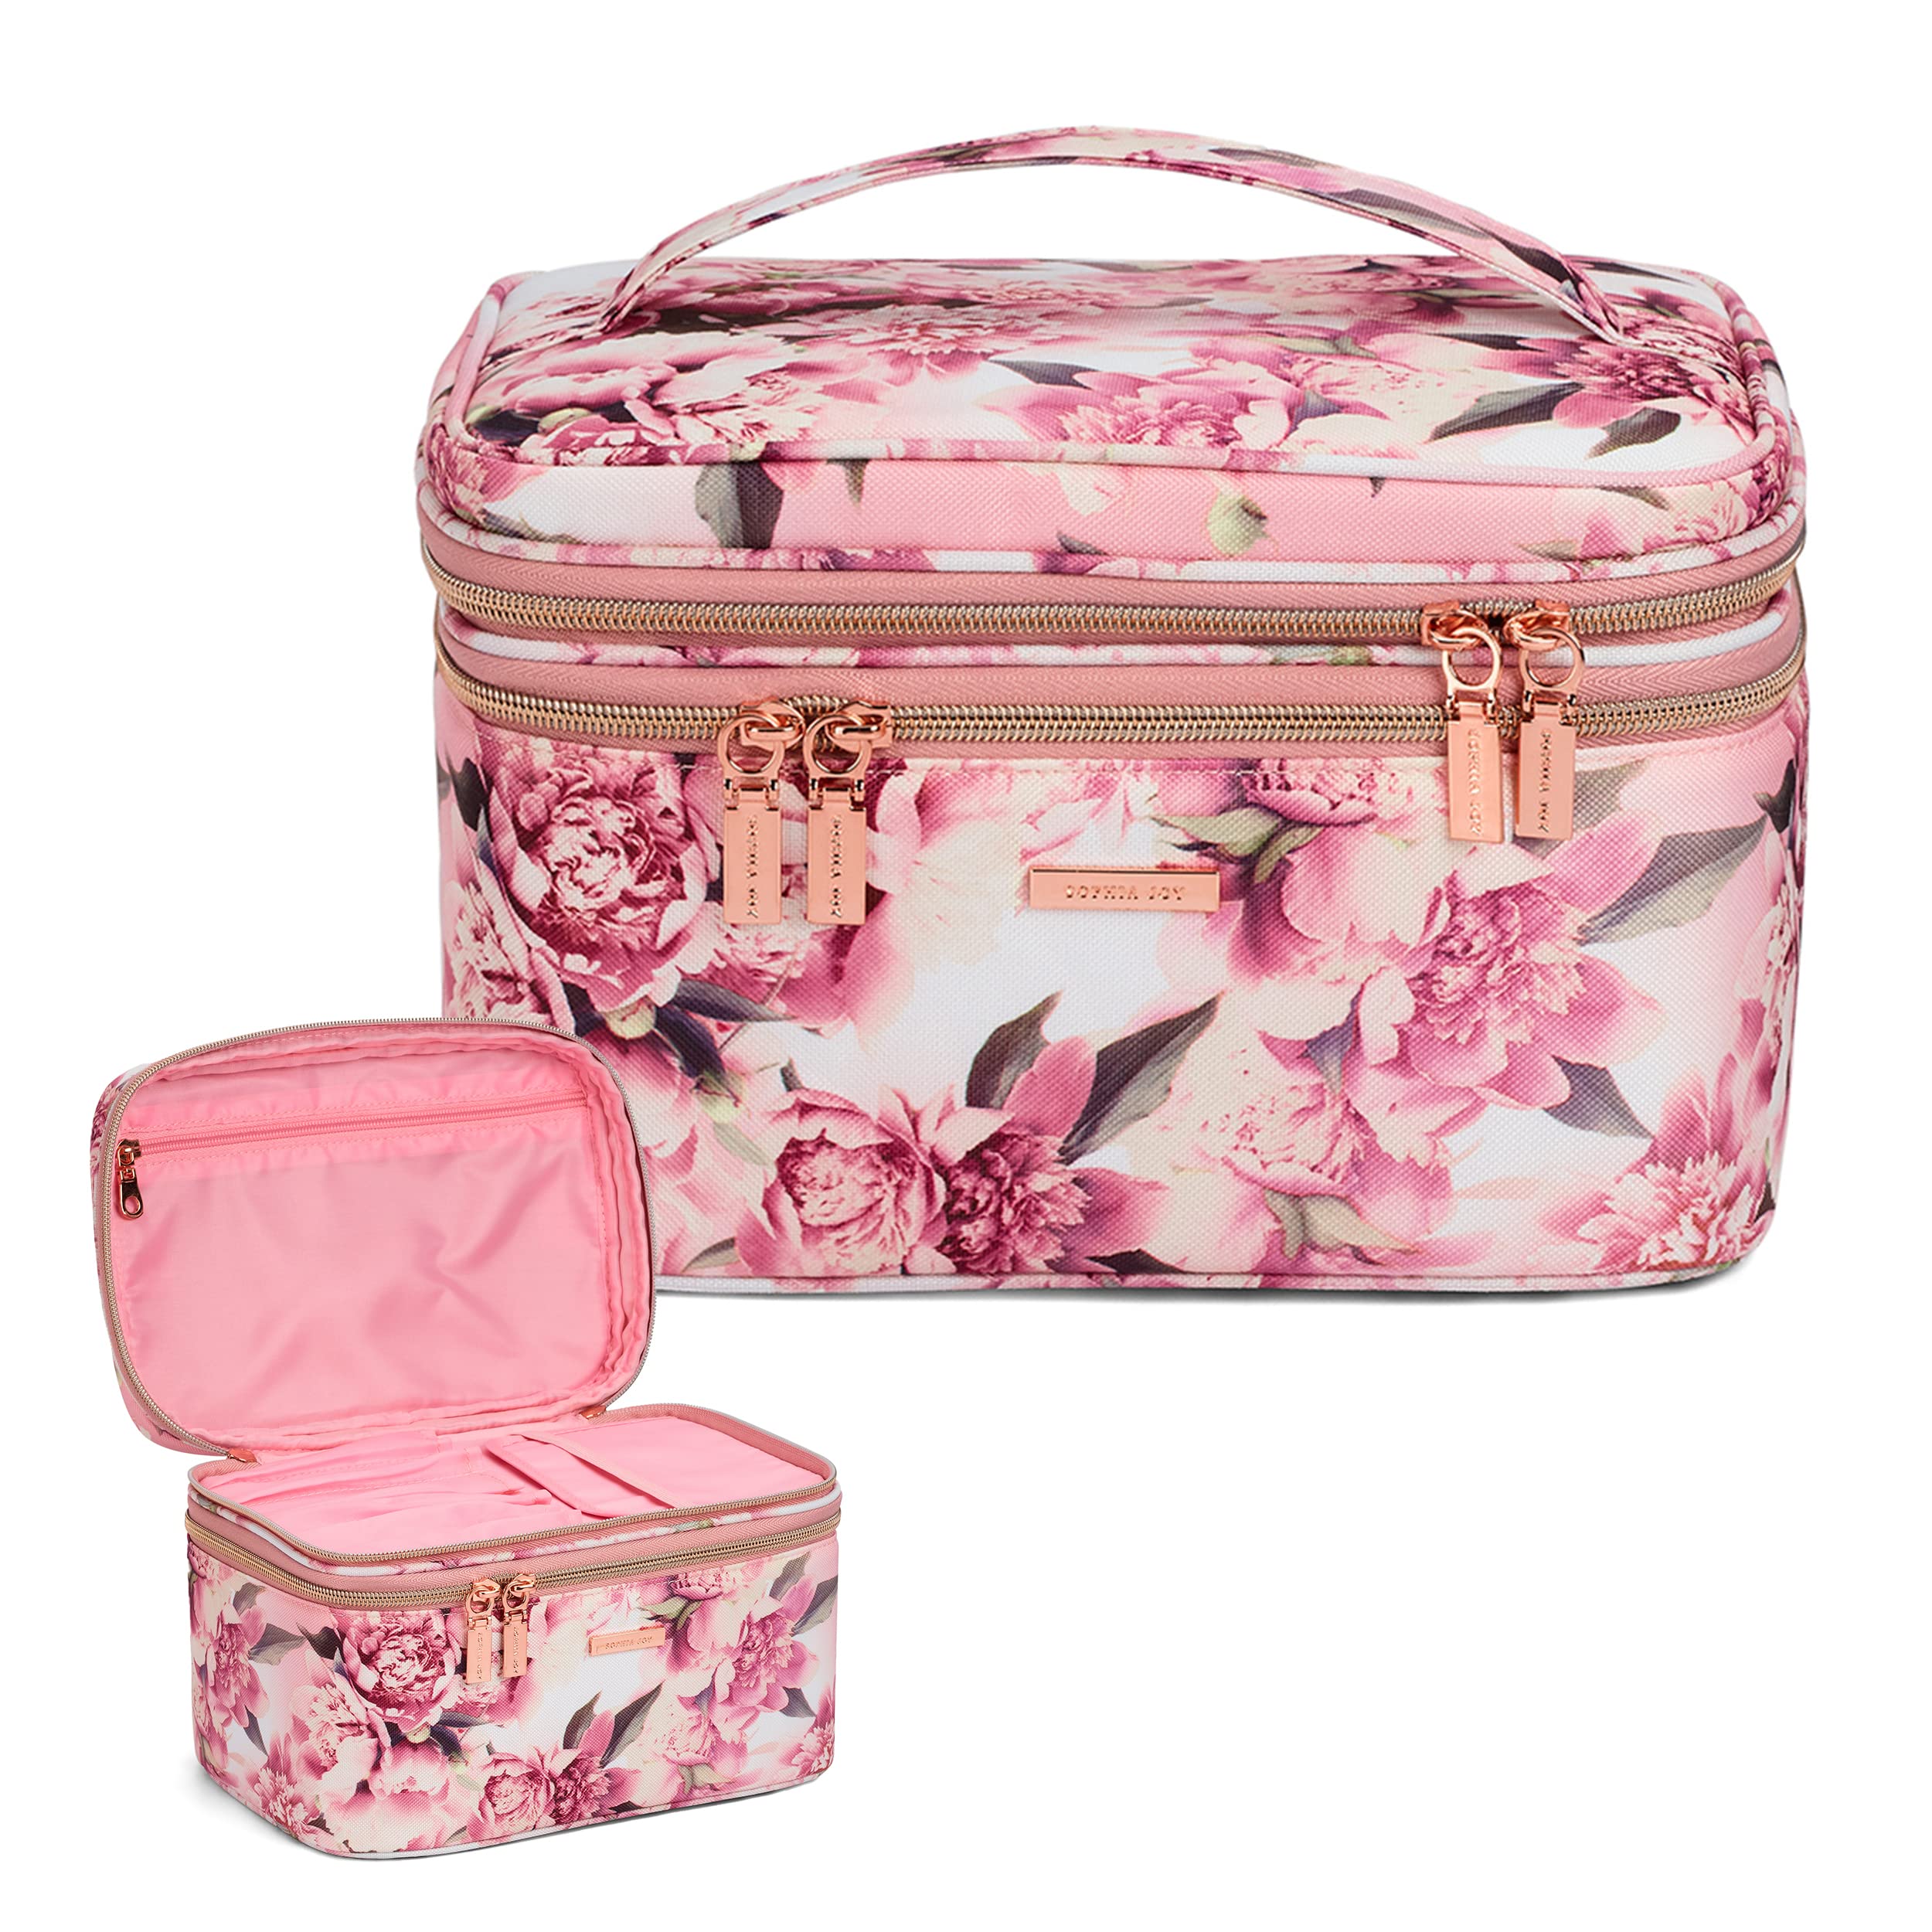 Conair Travel Makeup Bag, Large Toiletry and Cosmetic Bag, Perfect Size for Use At Home or Travel, Train Case Shape in Pink Floral Print